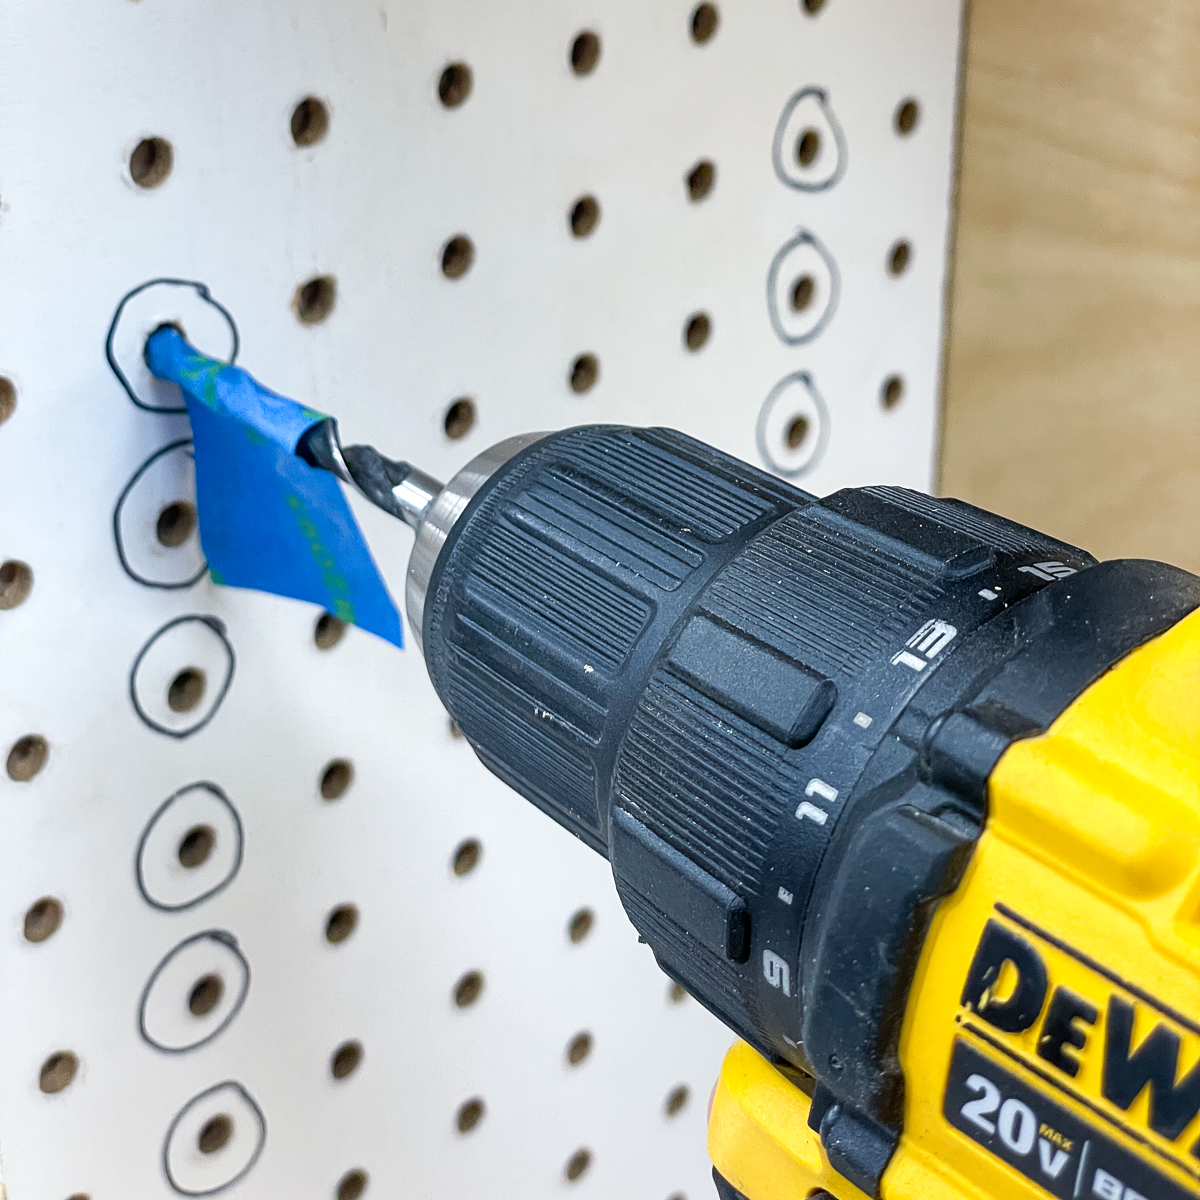 how to drill shelf pin holes